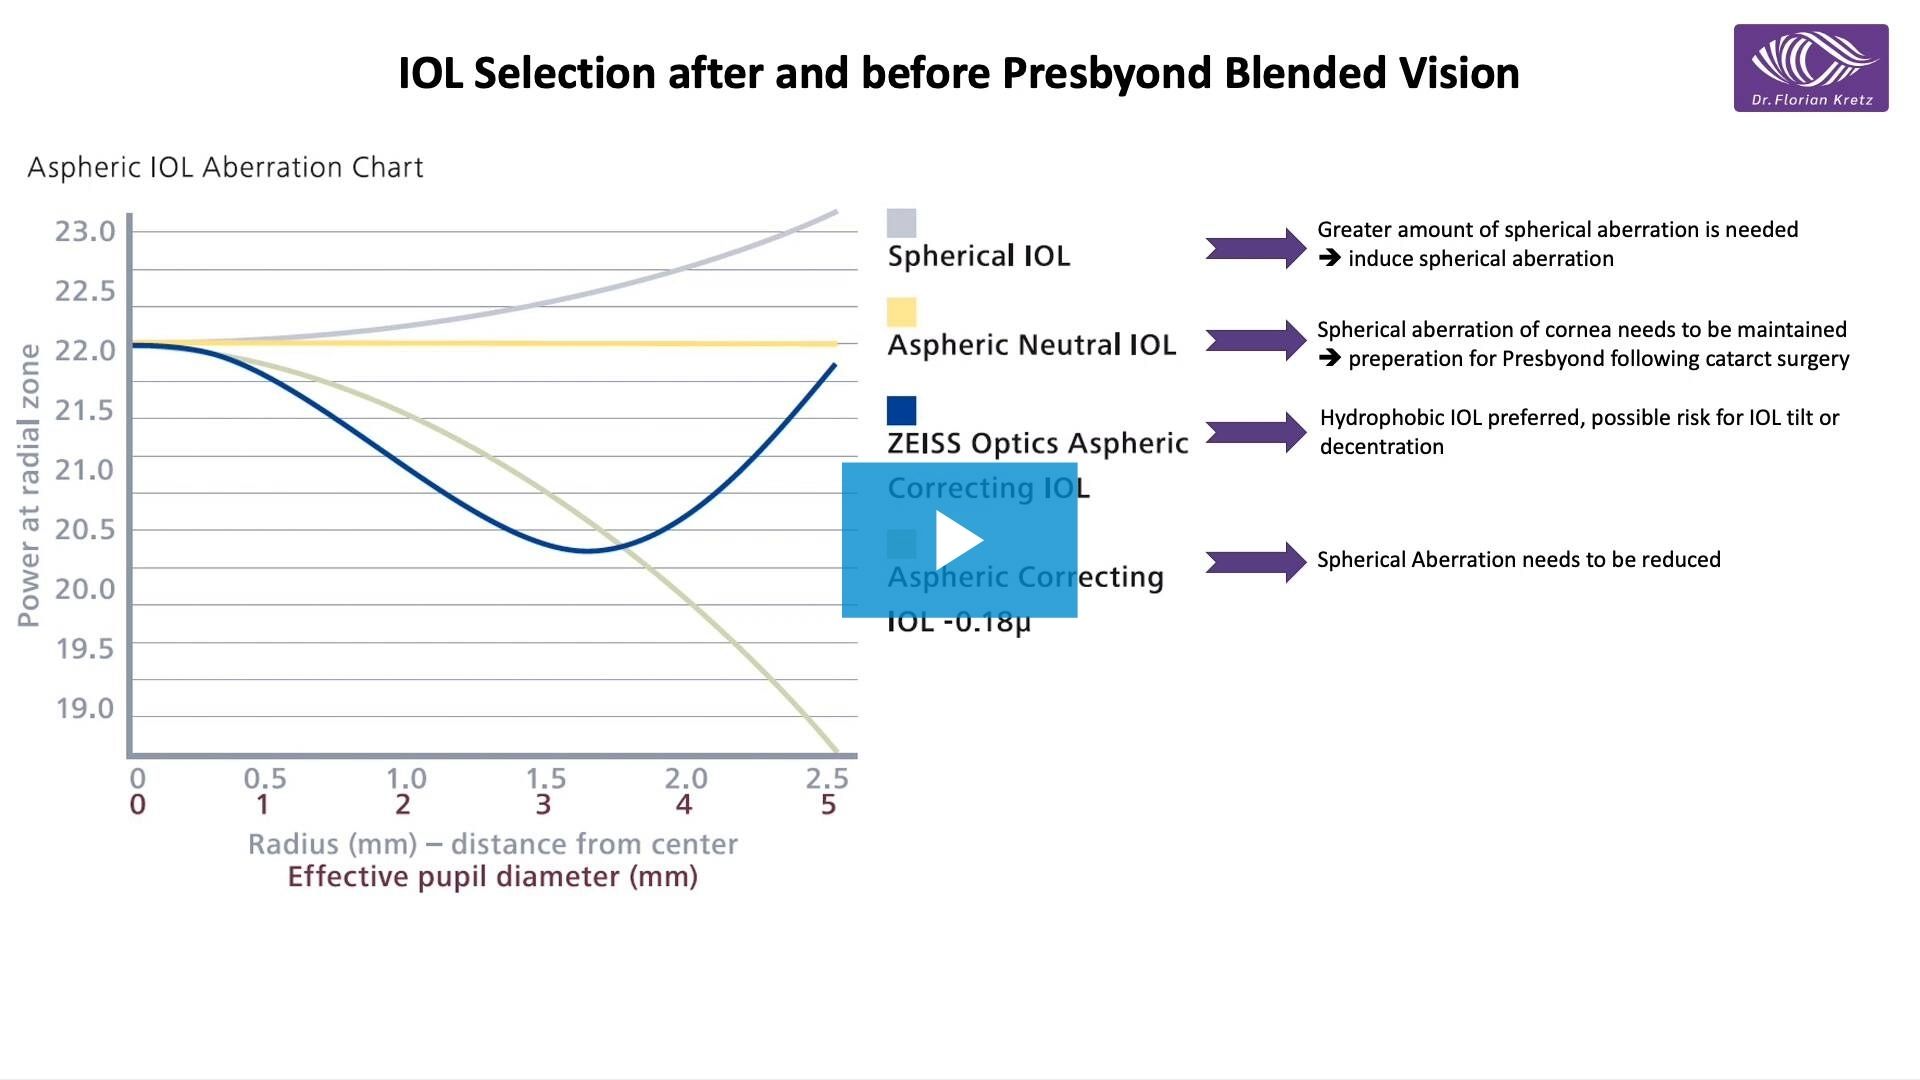 Lens options for presbyopic patients